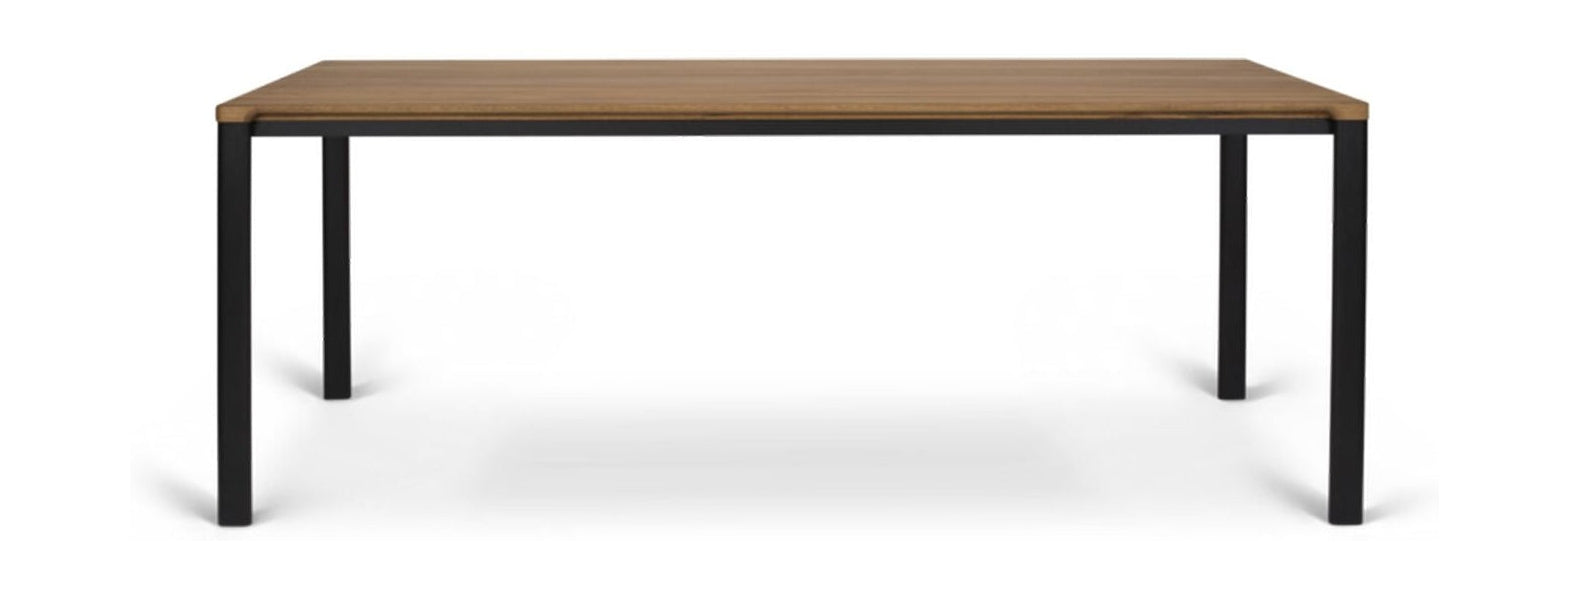 Bent Hansen Meet Table Without Extraction 200 Cm